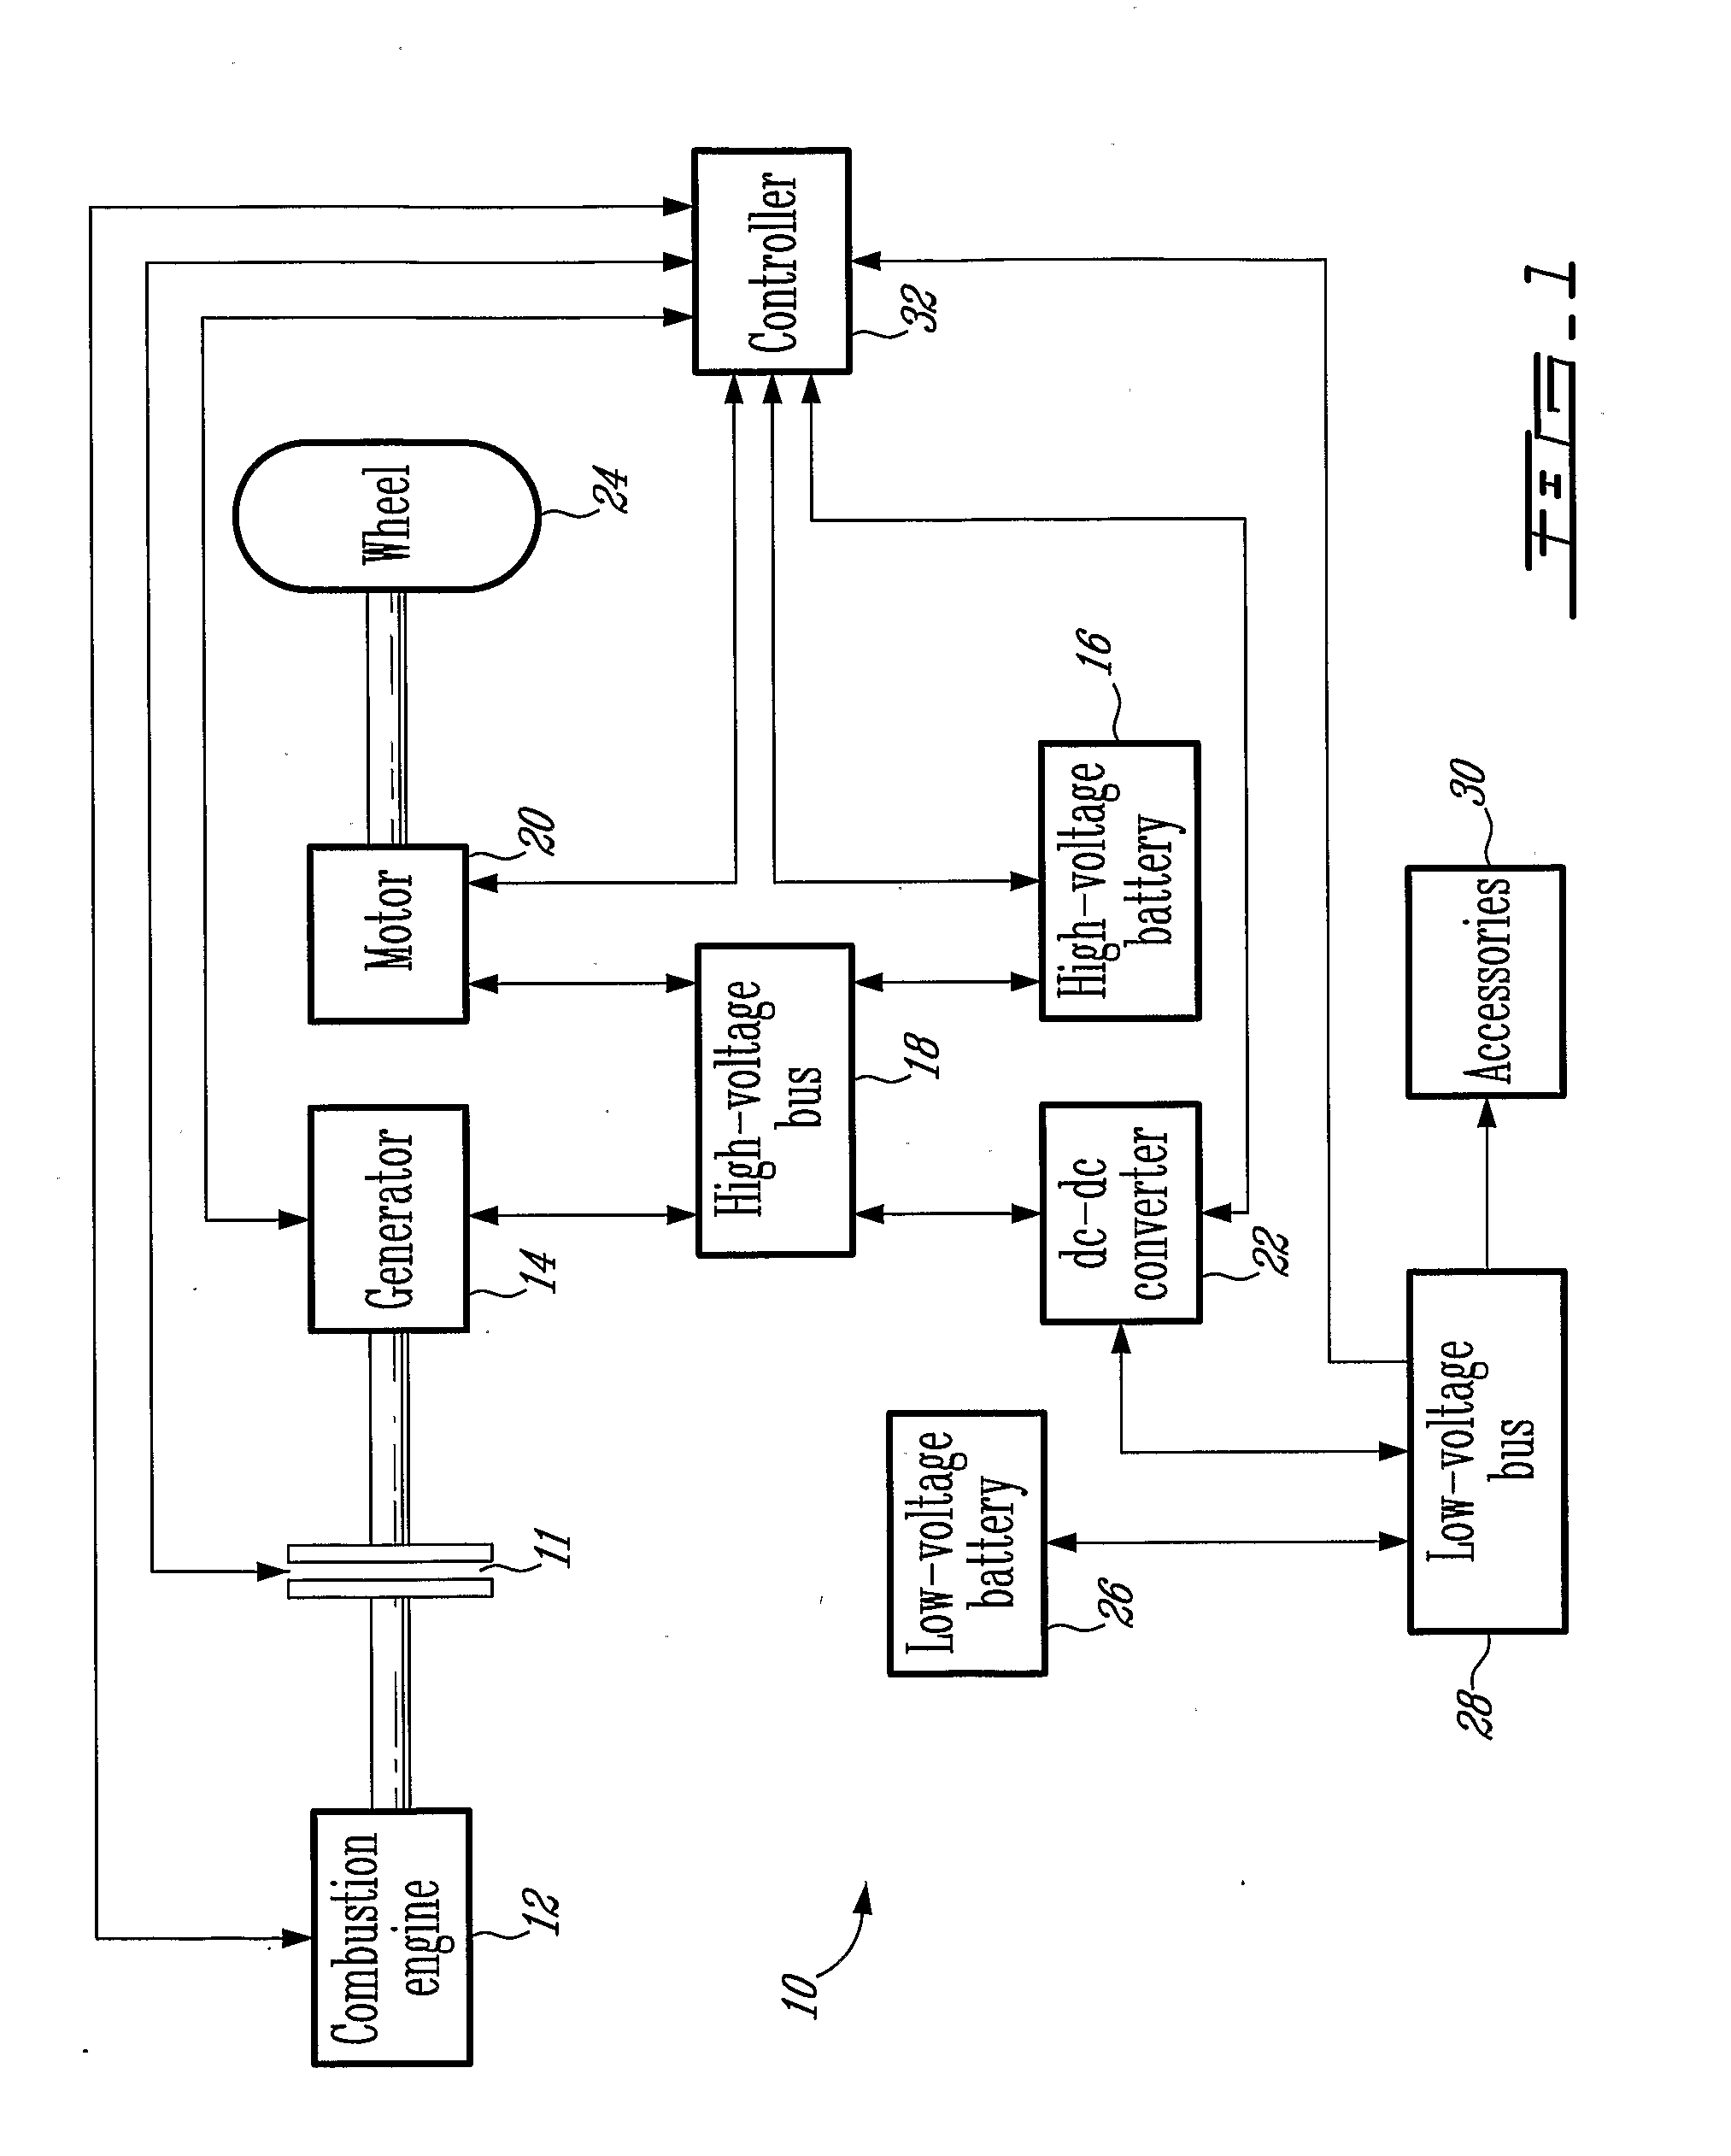 System and Method for Starting a Combustion Engine of a Hybrid Vehicle